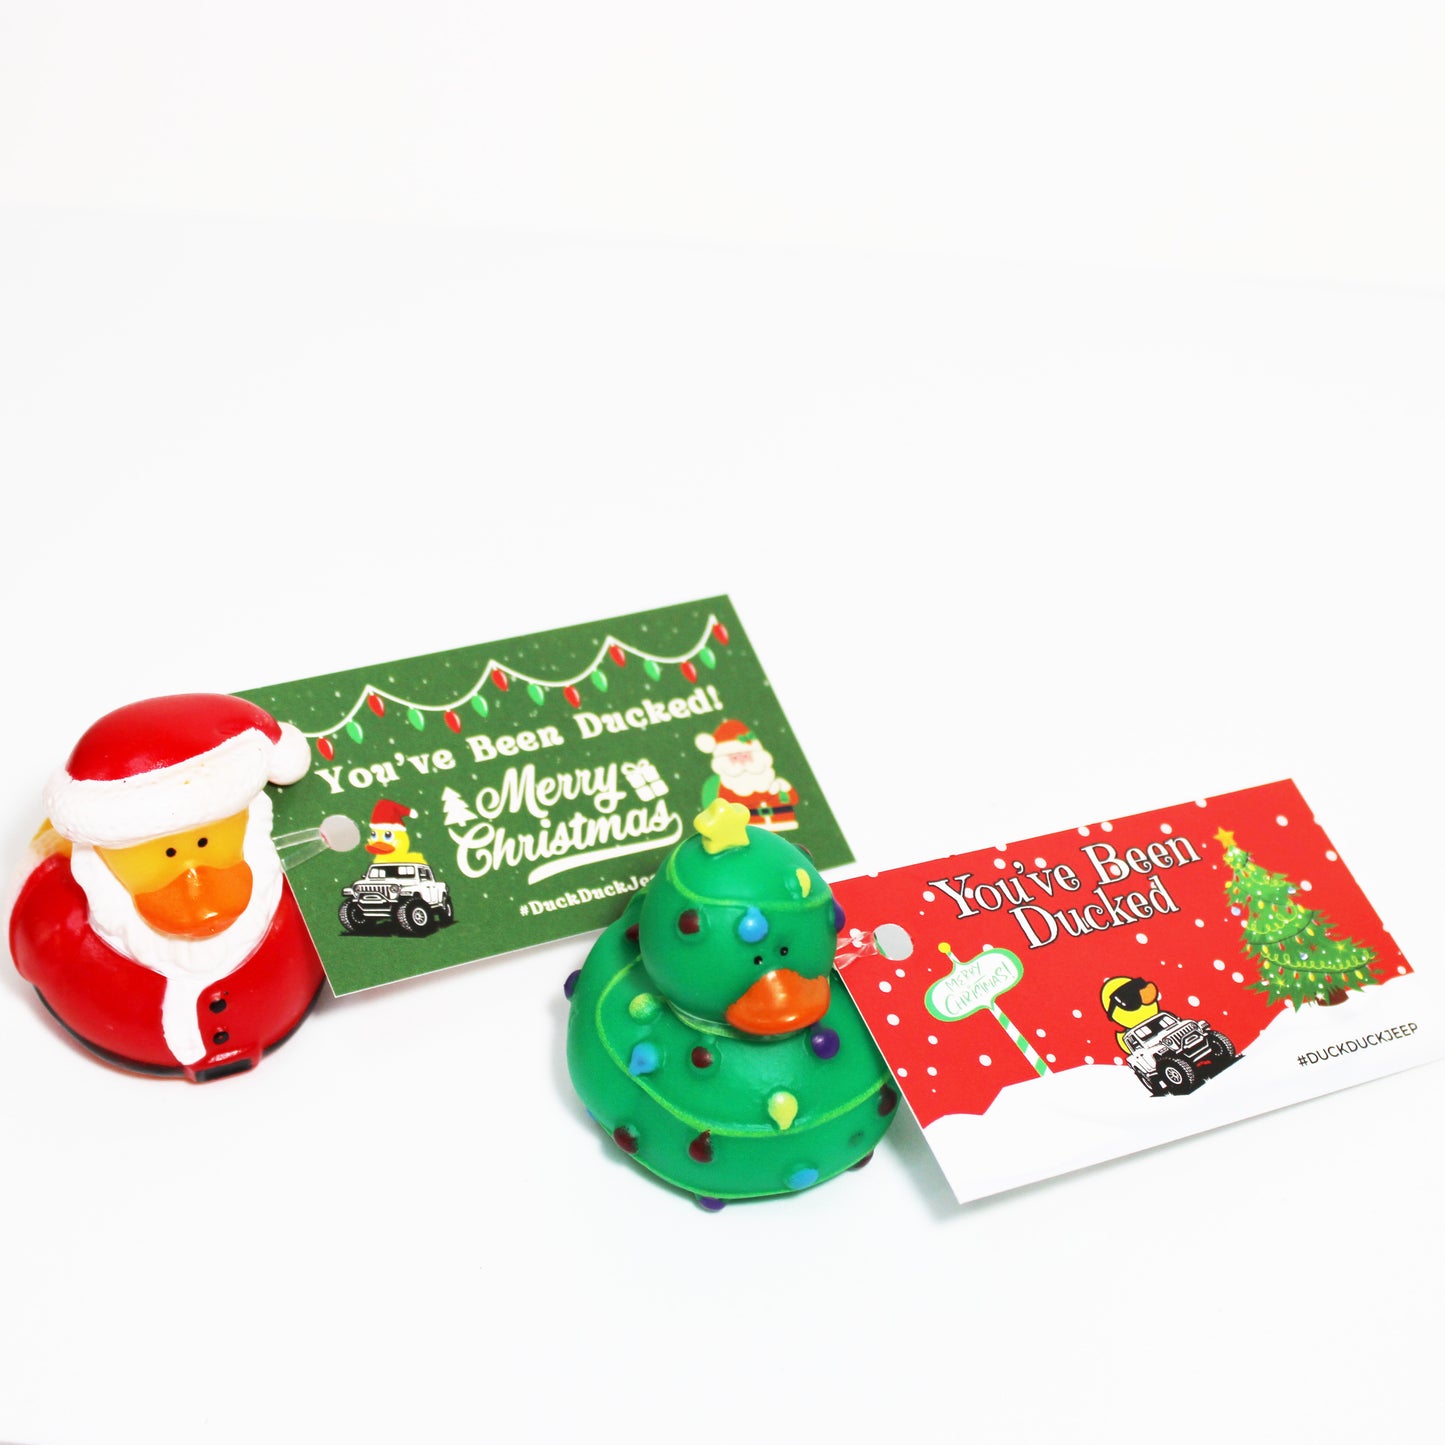 25 Christmas-Themed Tags for Duck Duck Jeep